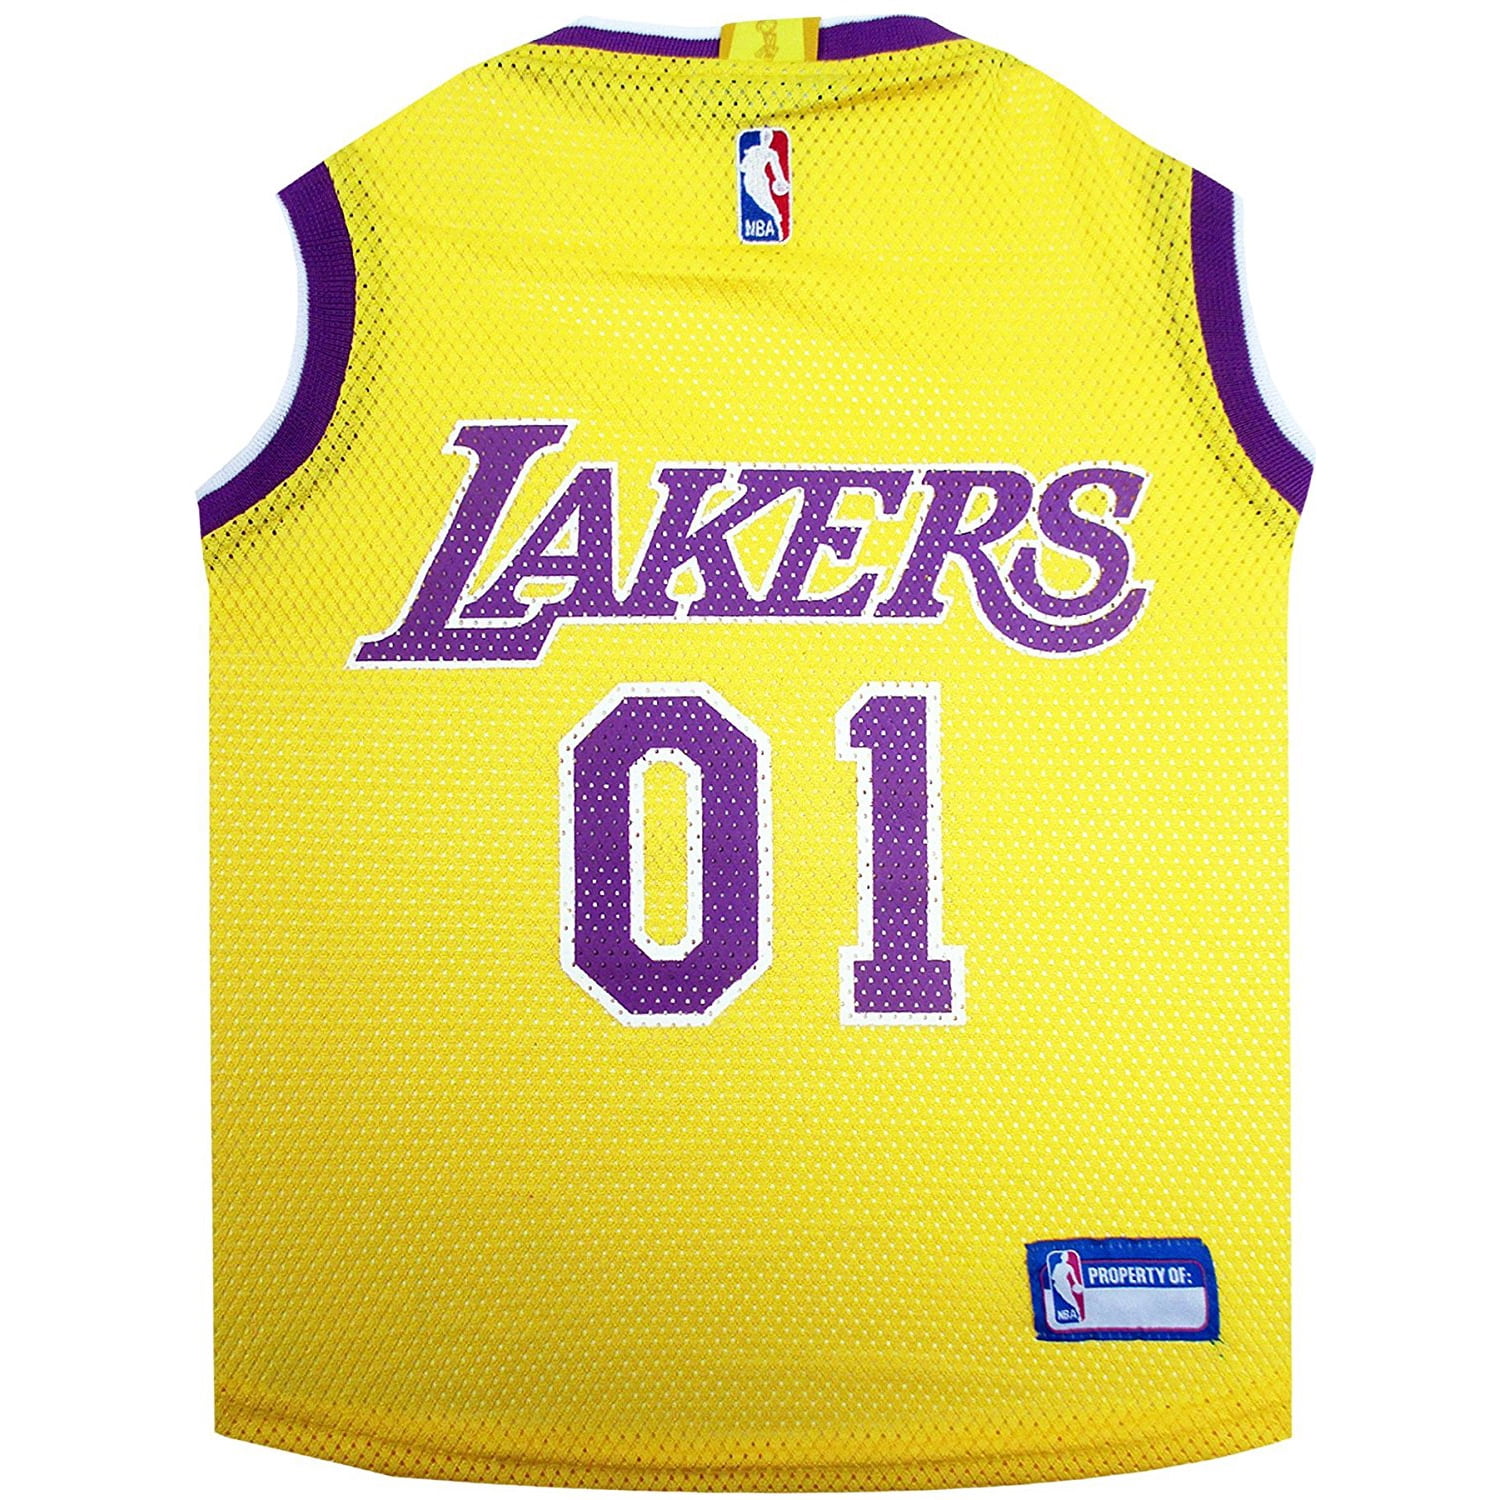 Pets First NBA La Lakers Mesh Basketball Jersey for DOGS & CATS - Licensed, Comfy Mesh, 21 Basketball Teams / 5 sizes